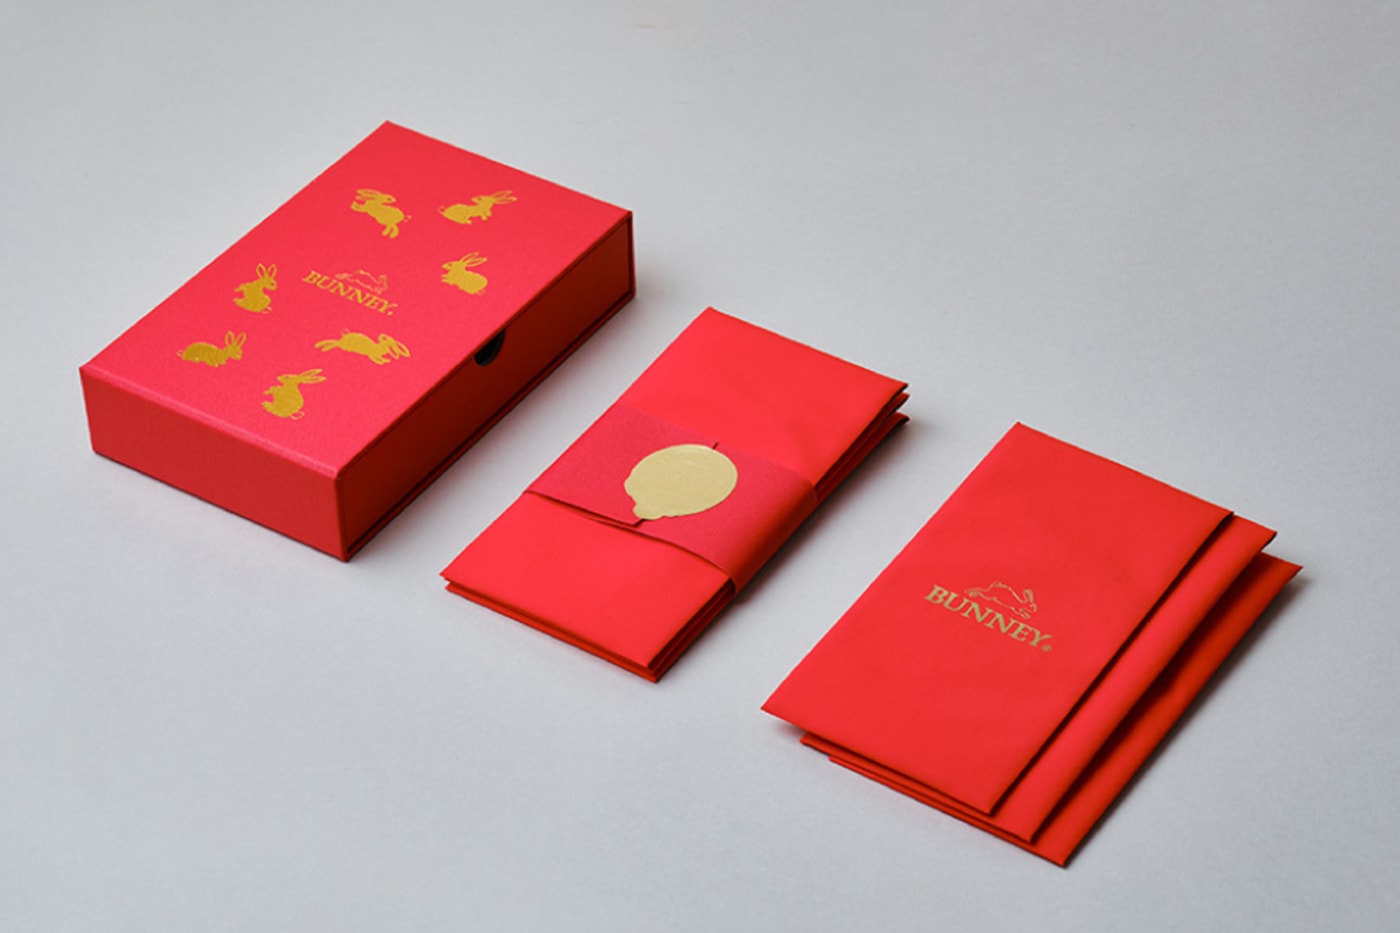 Louis Vuitton Year of Rabbit Lunar Chinese New Year RED ENVELOPES w/ Rabbit  Tags